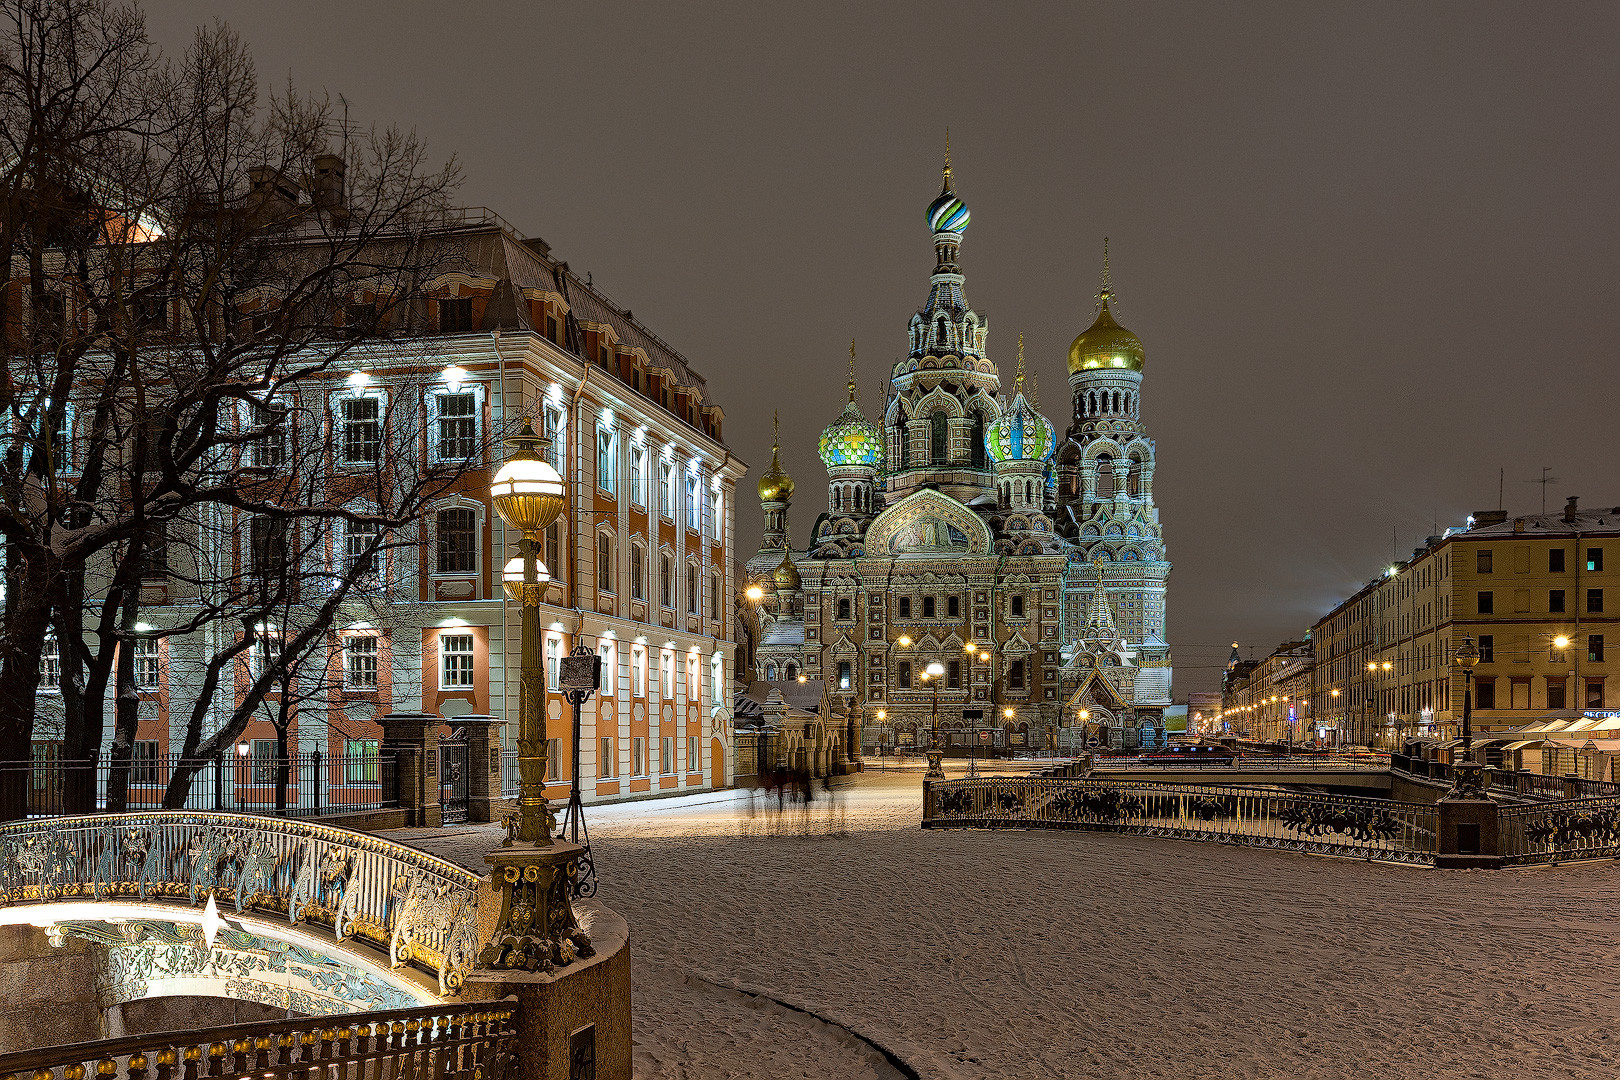 Church of the Savior on Blood - St. Petersburg, Russia